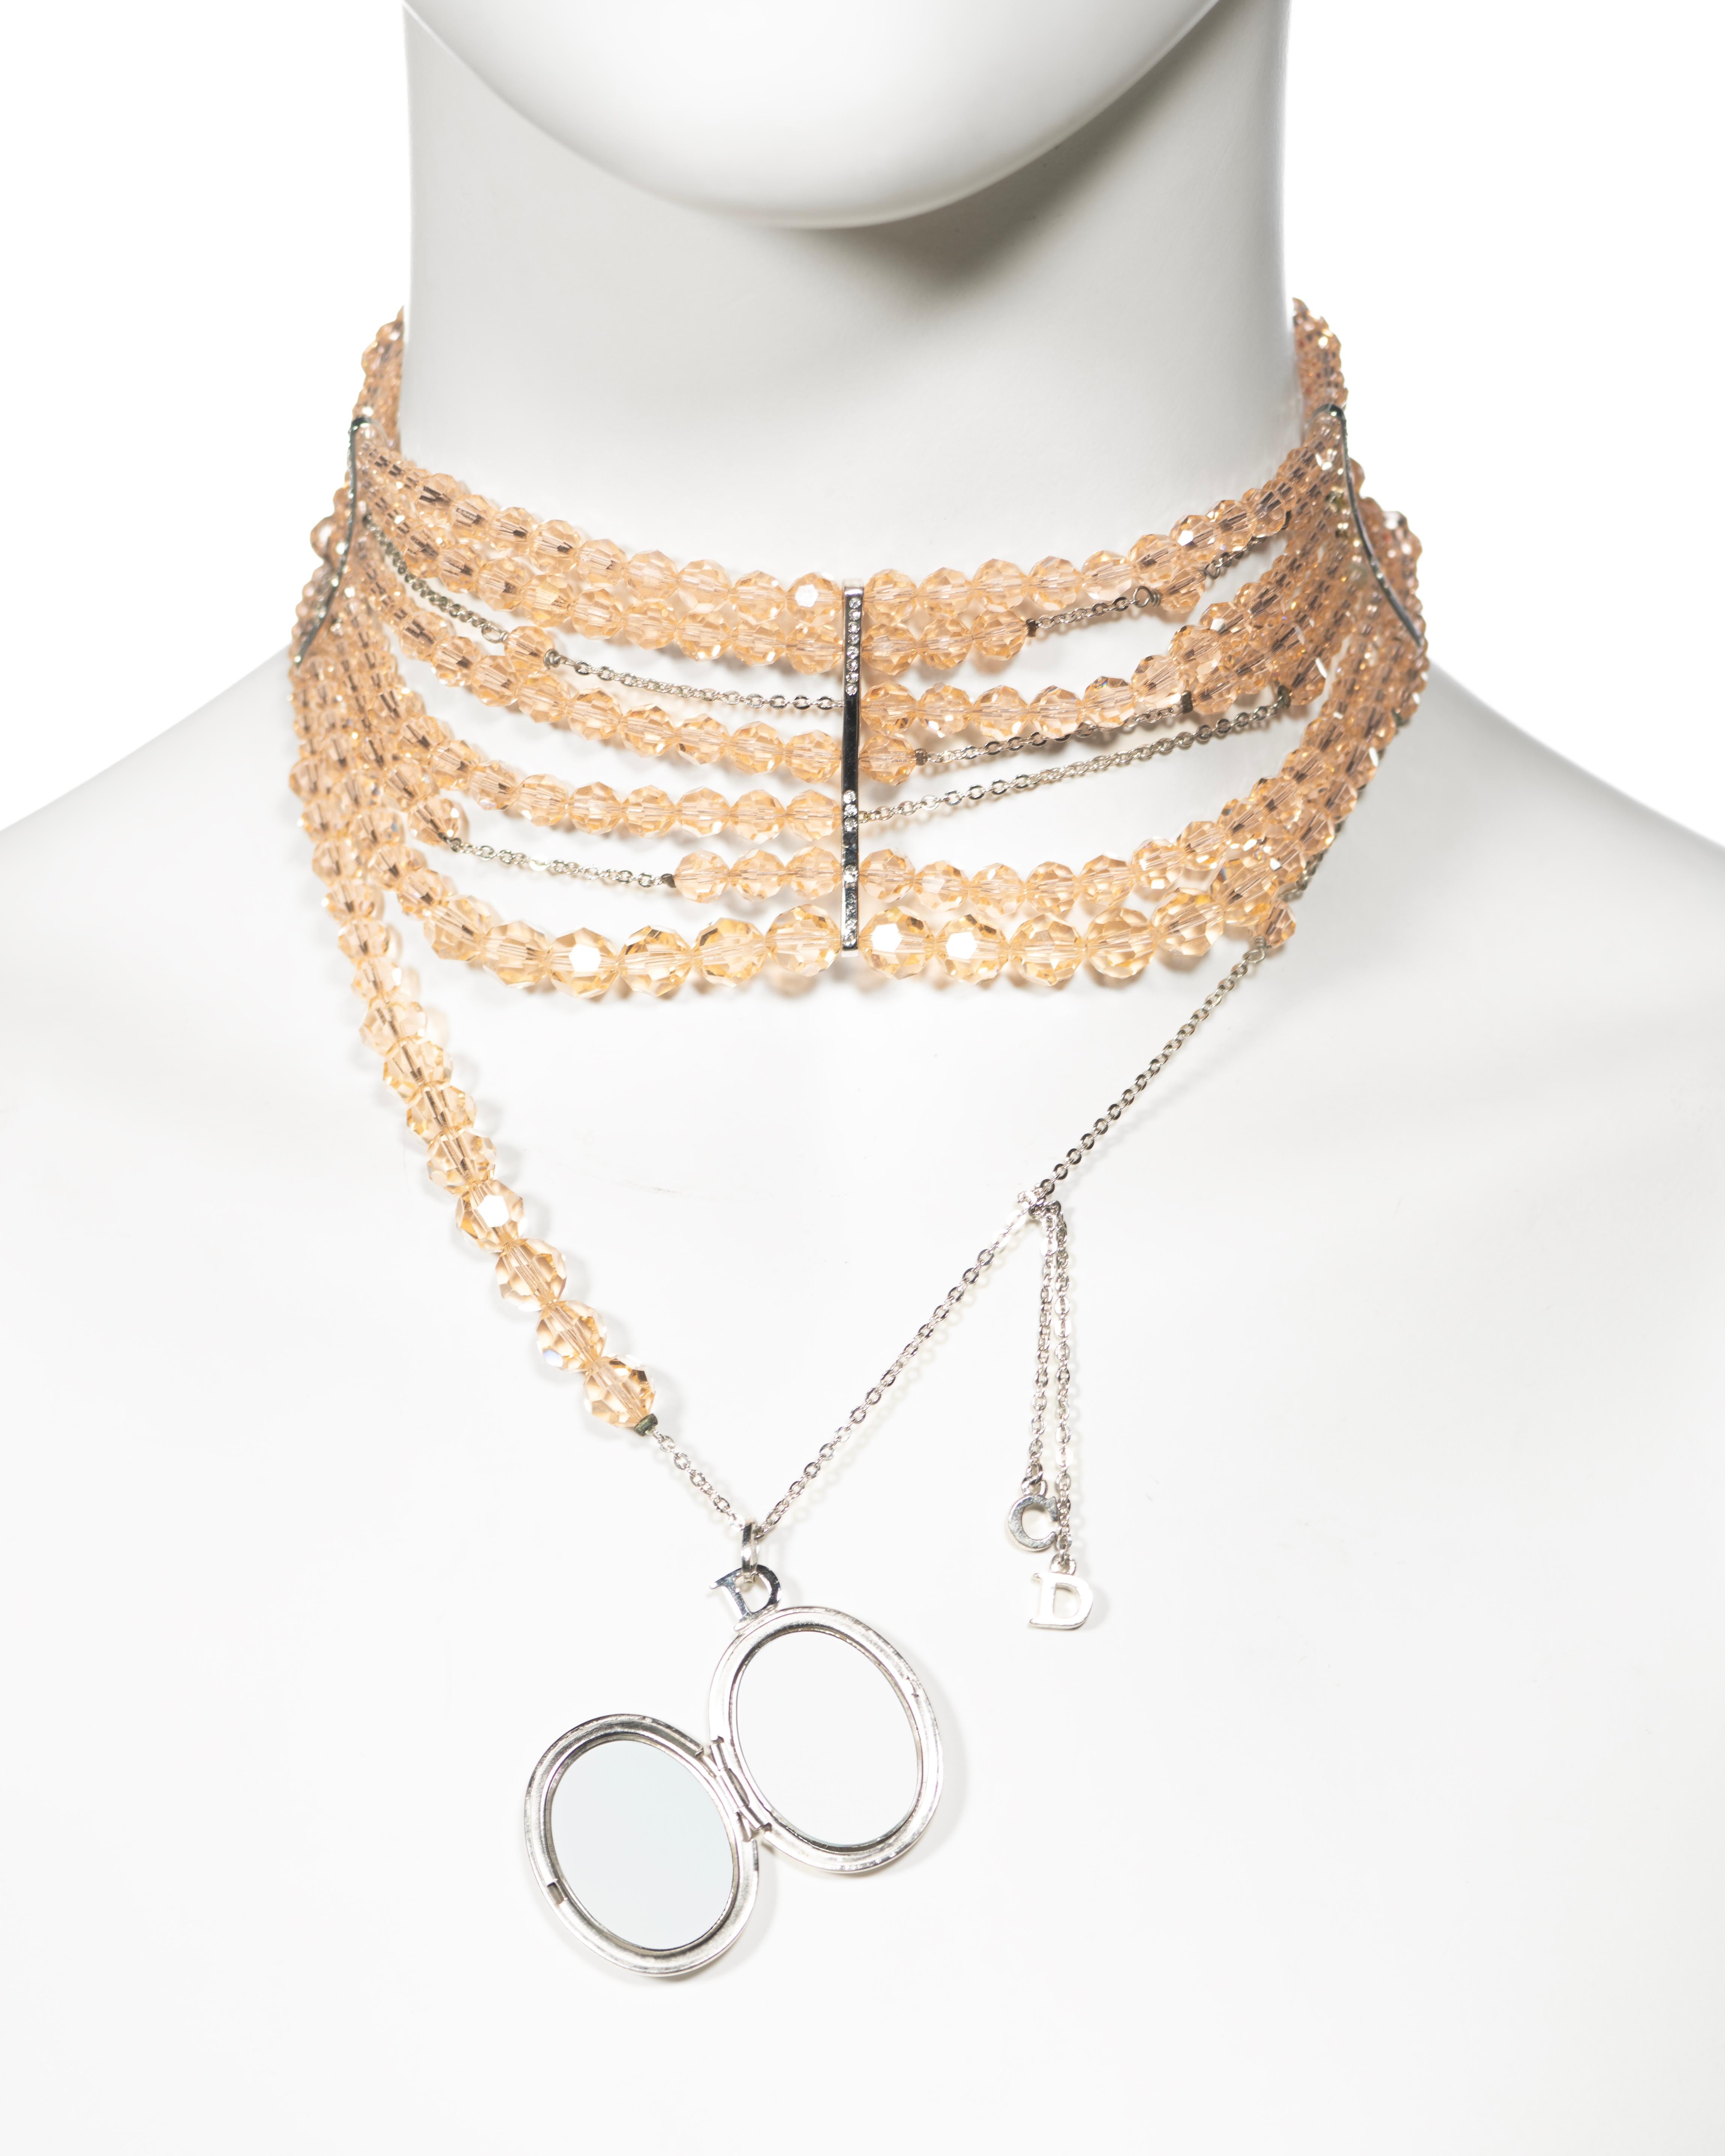 Christian Dior by John Galliano Distressed Peach Bead Choker Necklace, c. 2004 For Sale 2